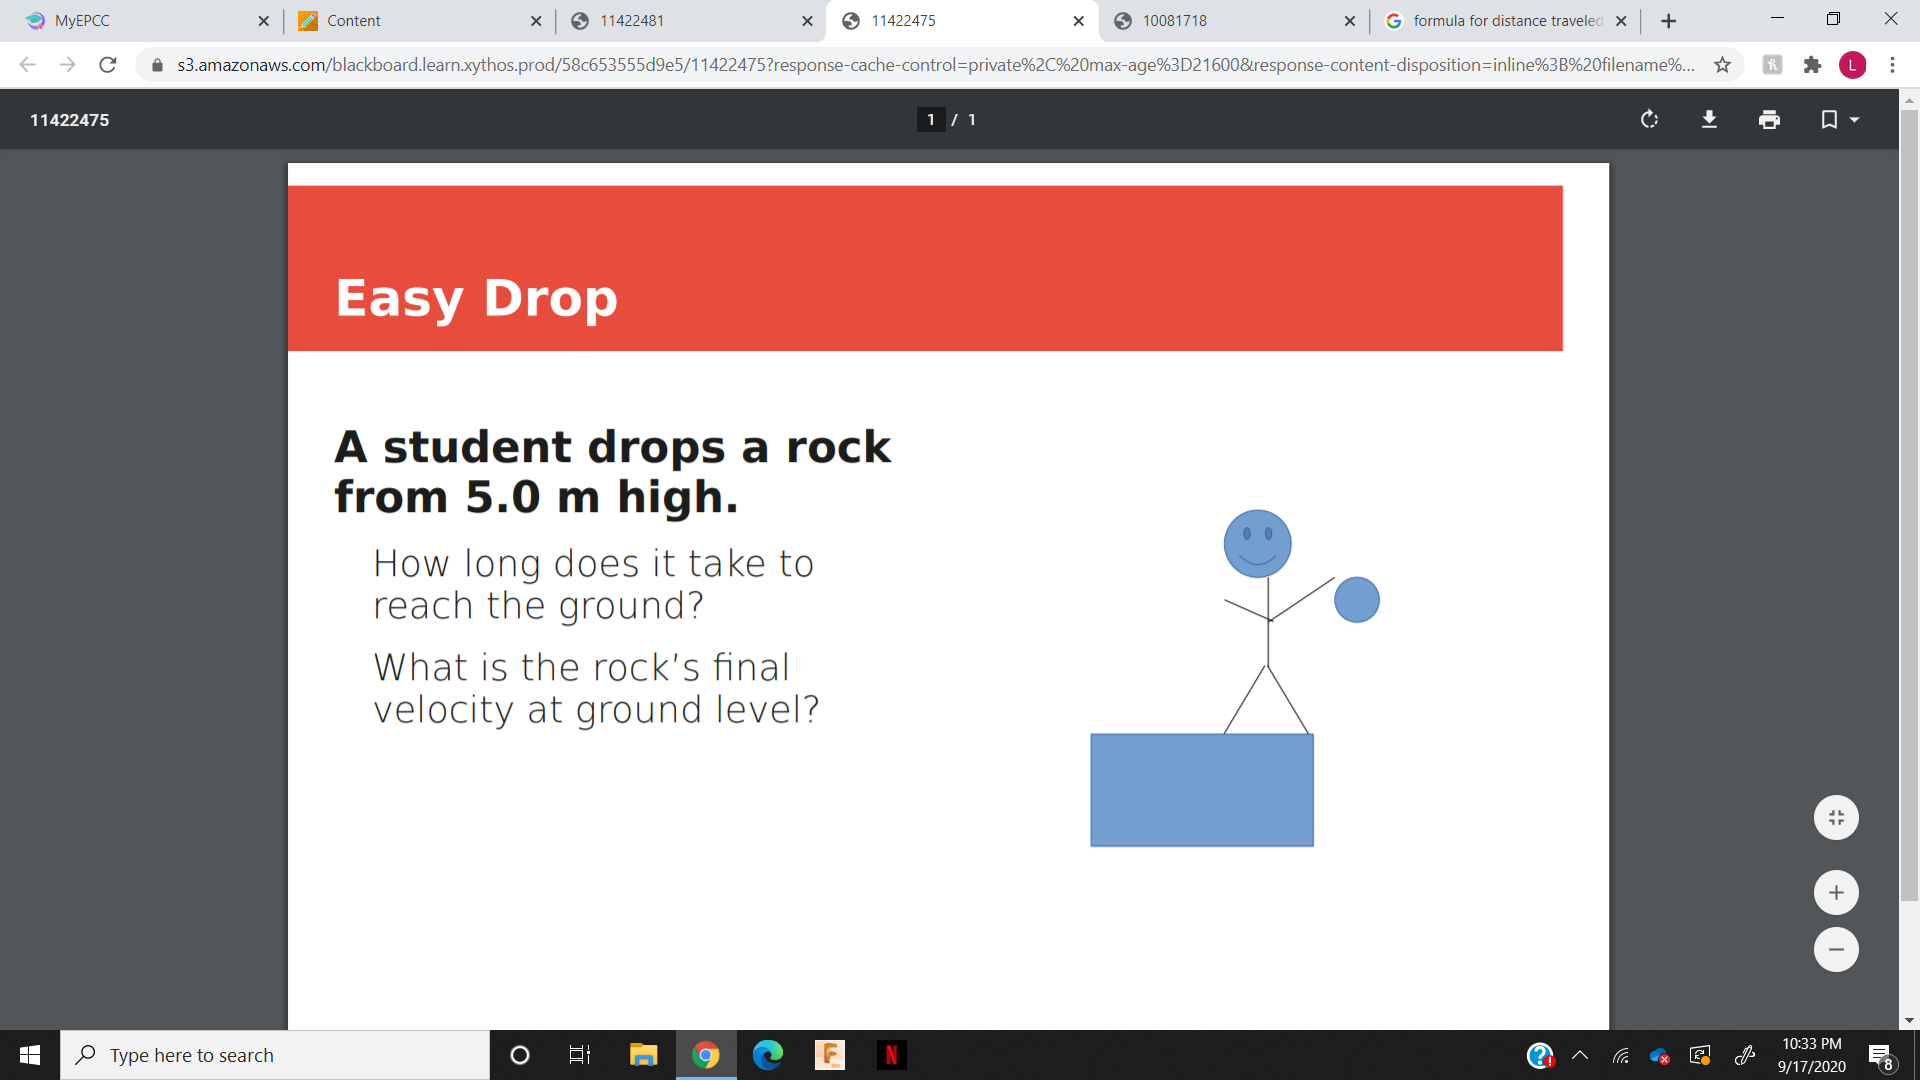 A student drops a rock
from 5.0 m high.
How long does it take to
reach the ground?
What is the rock's final
velocity at ground level?
